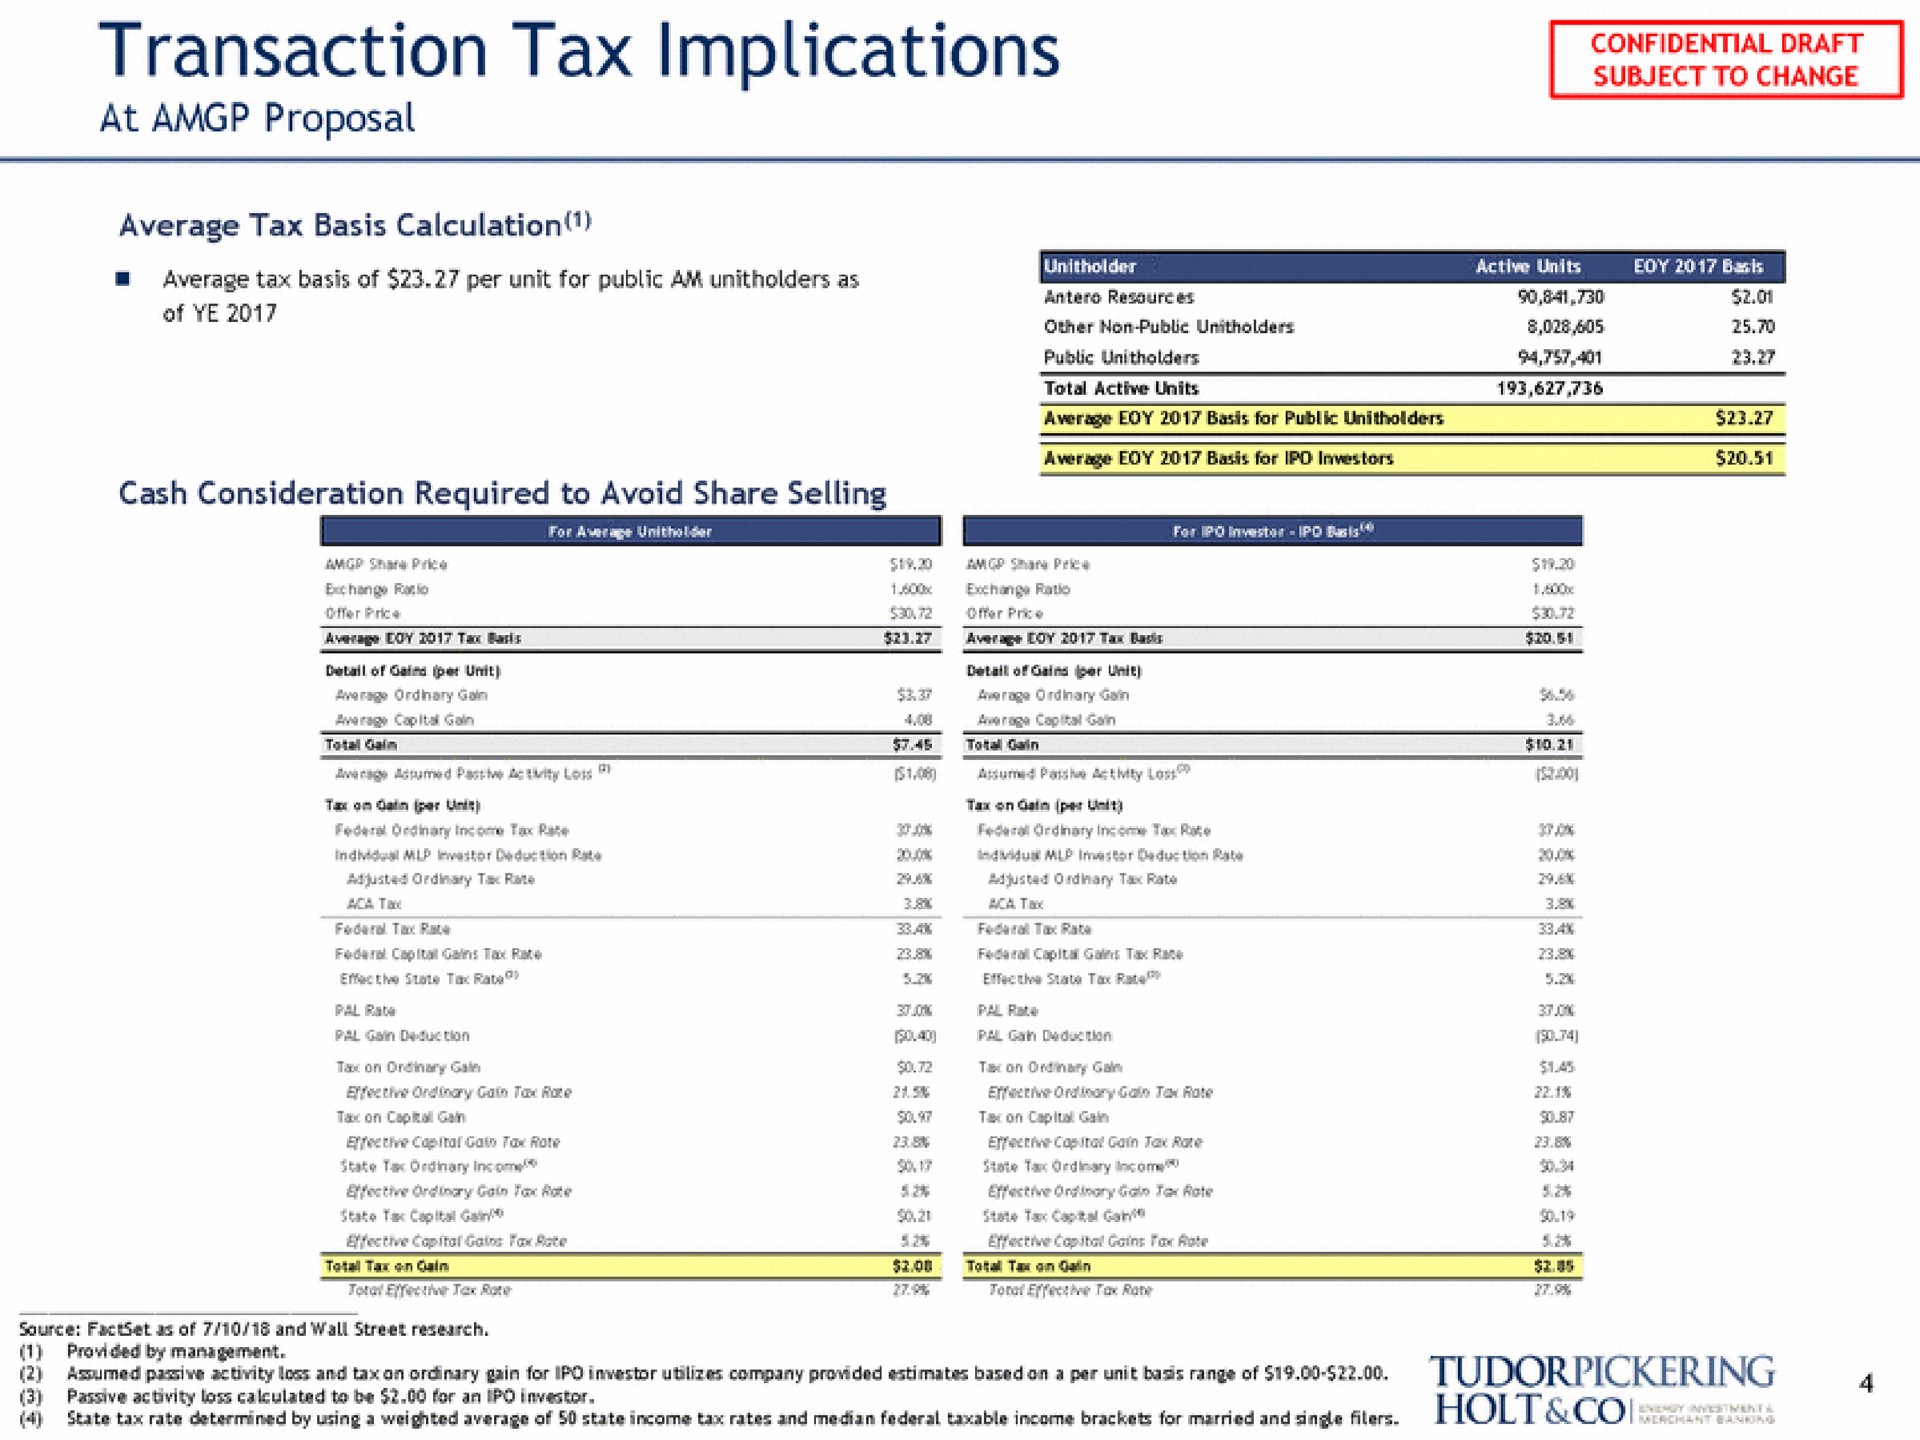 transaction tax implications at proposal subject to change holt col | Tudor, Pickering, Holt & Co